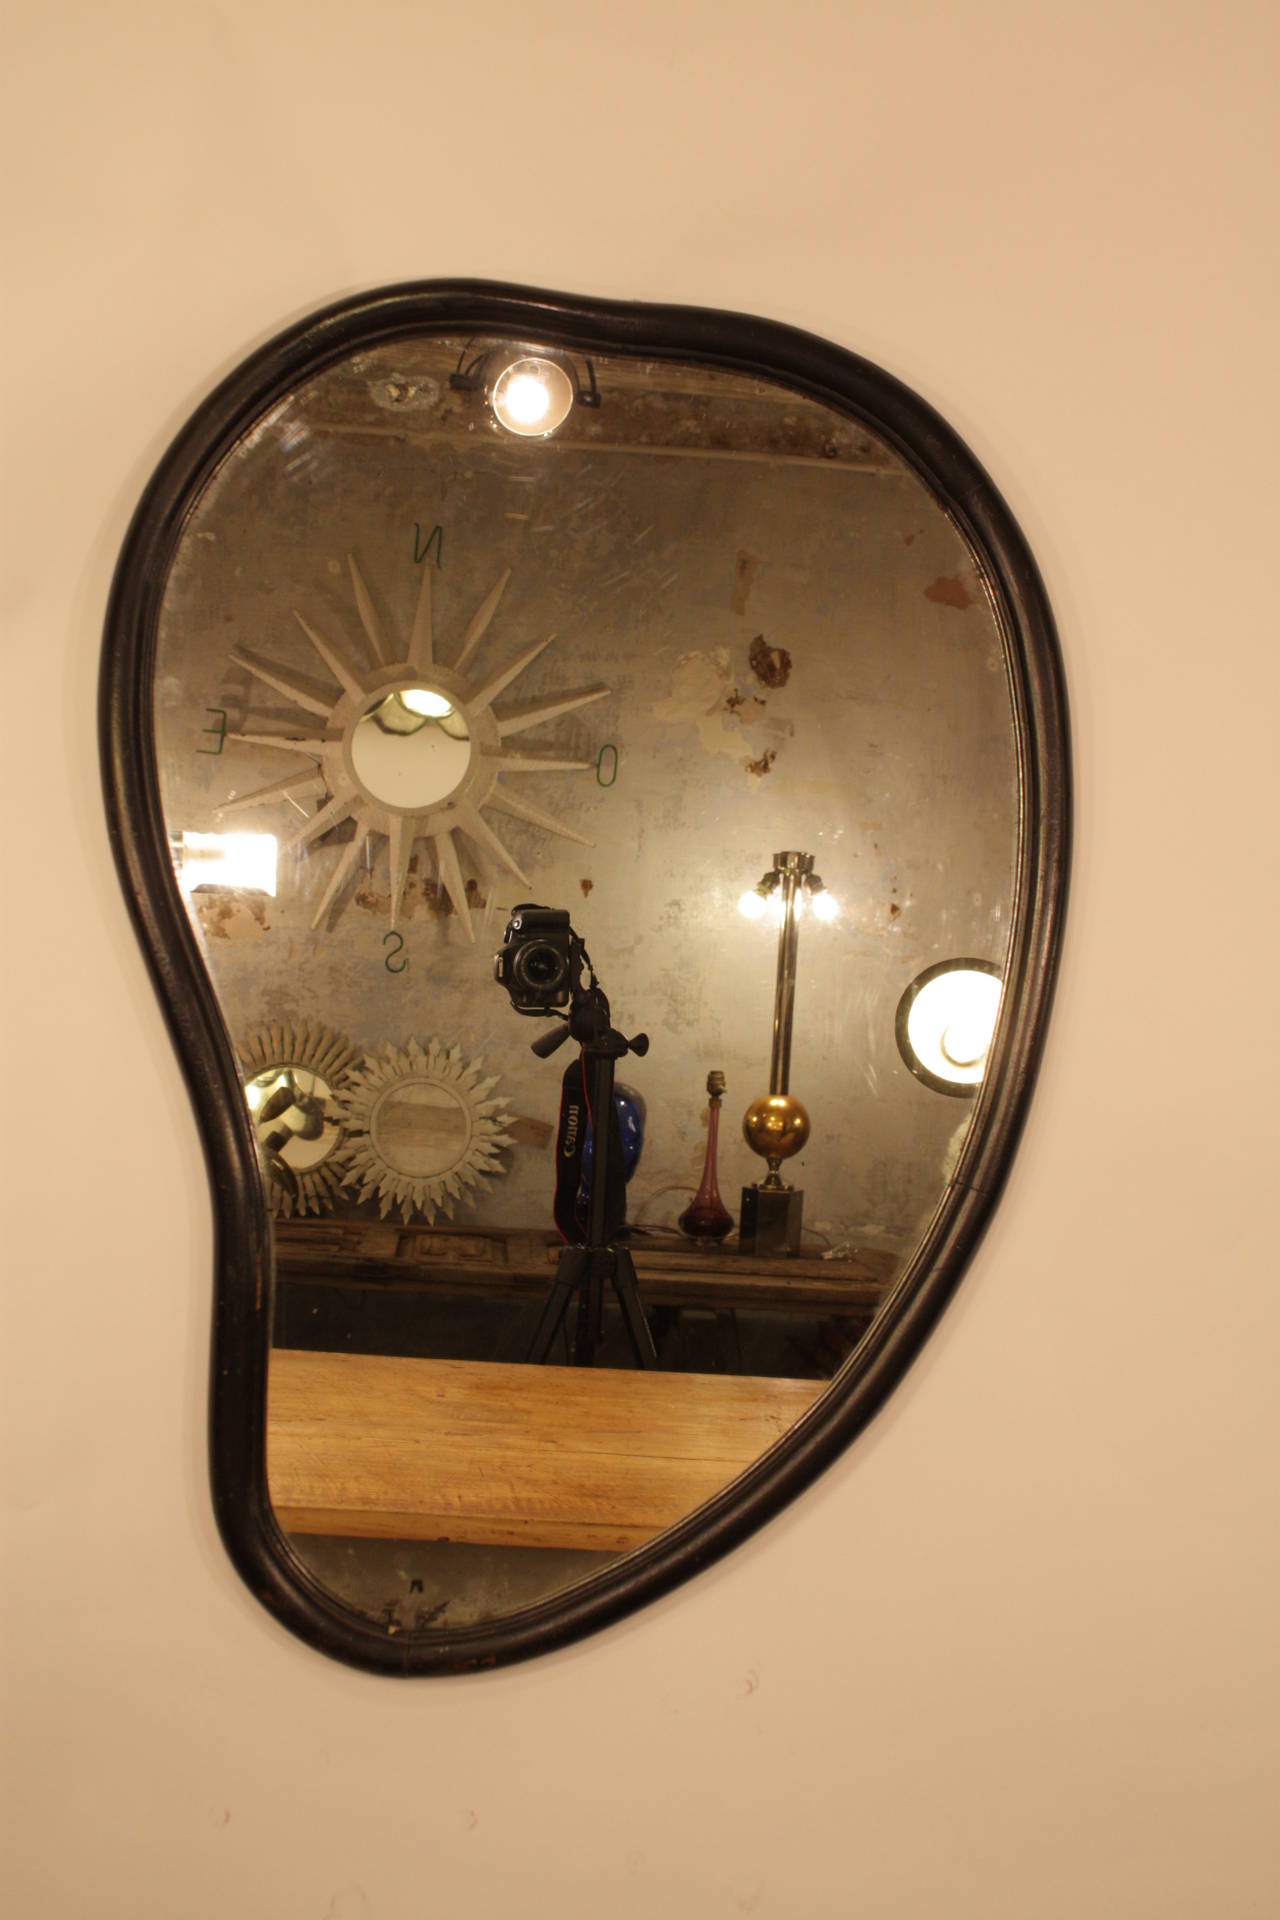 Vintage curved surrealist mirror in the style of Salvador Dali, ebonized carved wood and original mirror.
Spain, 1960s.